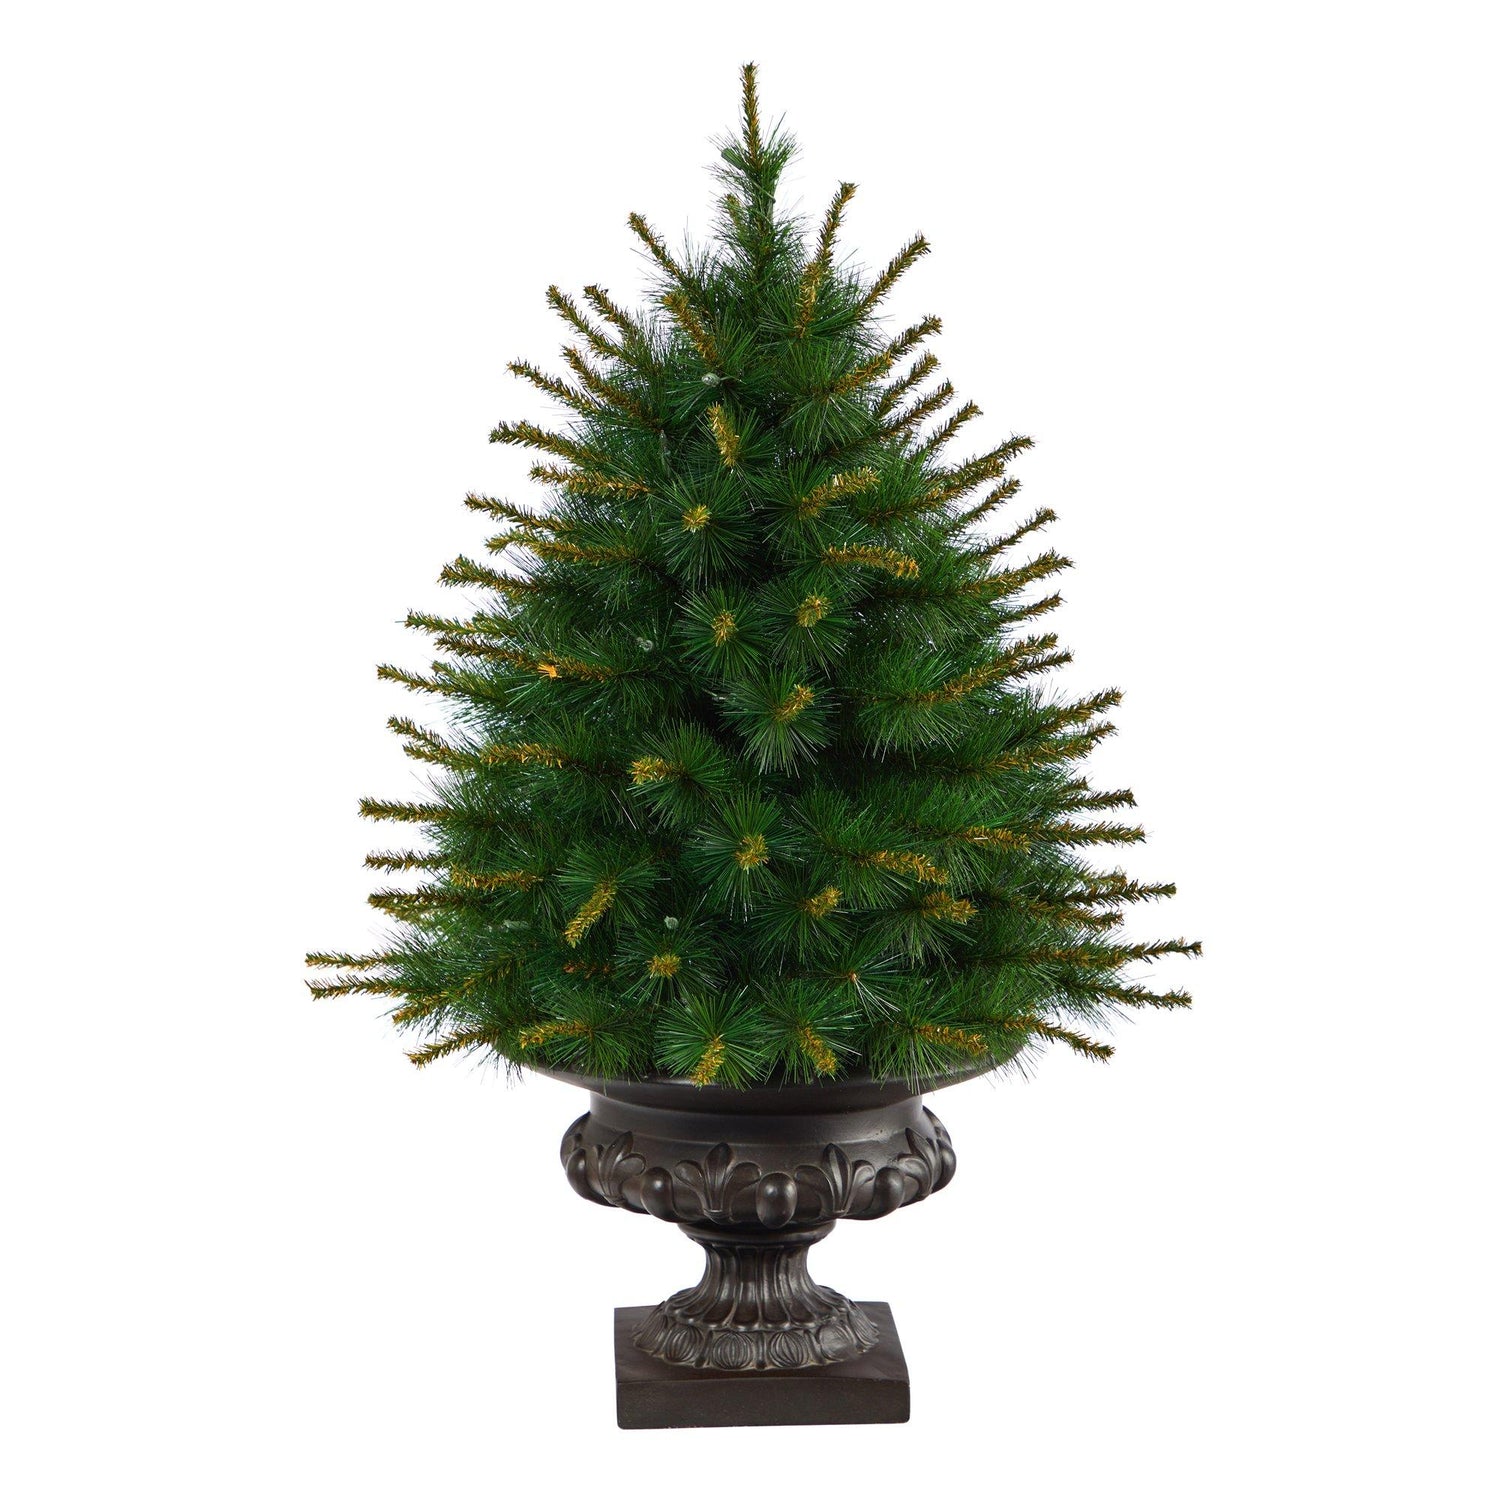 3.5’ New England Pine Artificial Christmas Tree with 50 Clear Lights and 117 Bendable Branches in Iron Colored Urn